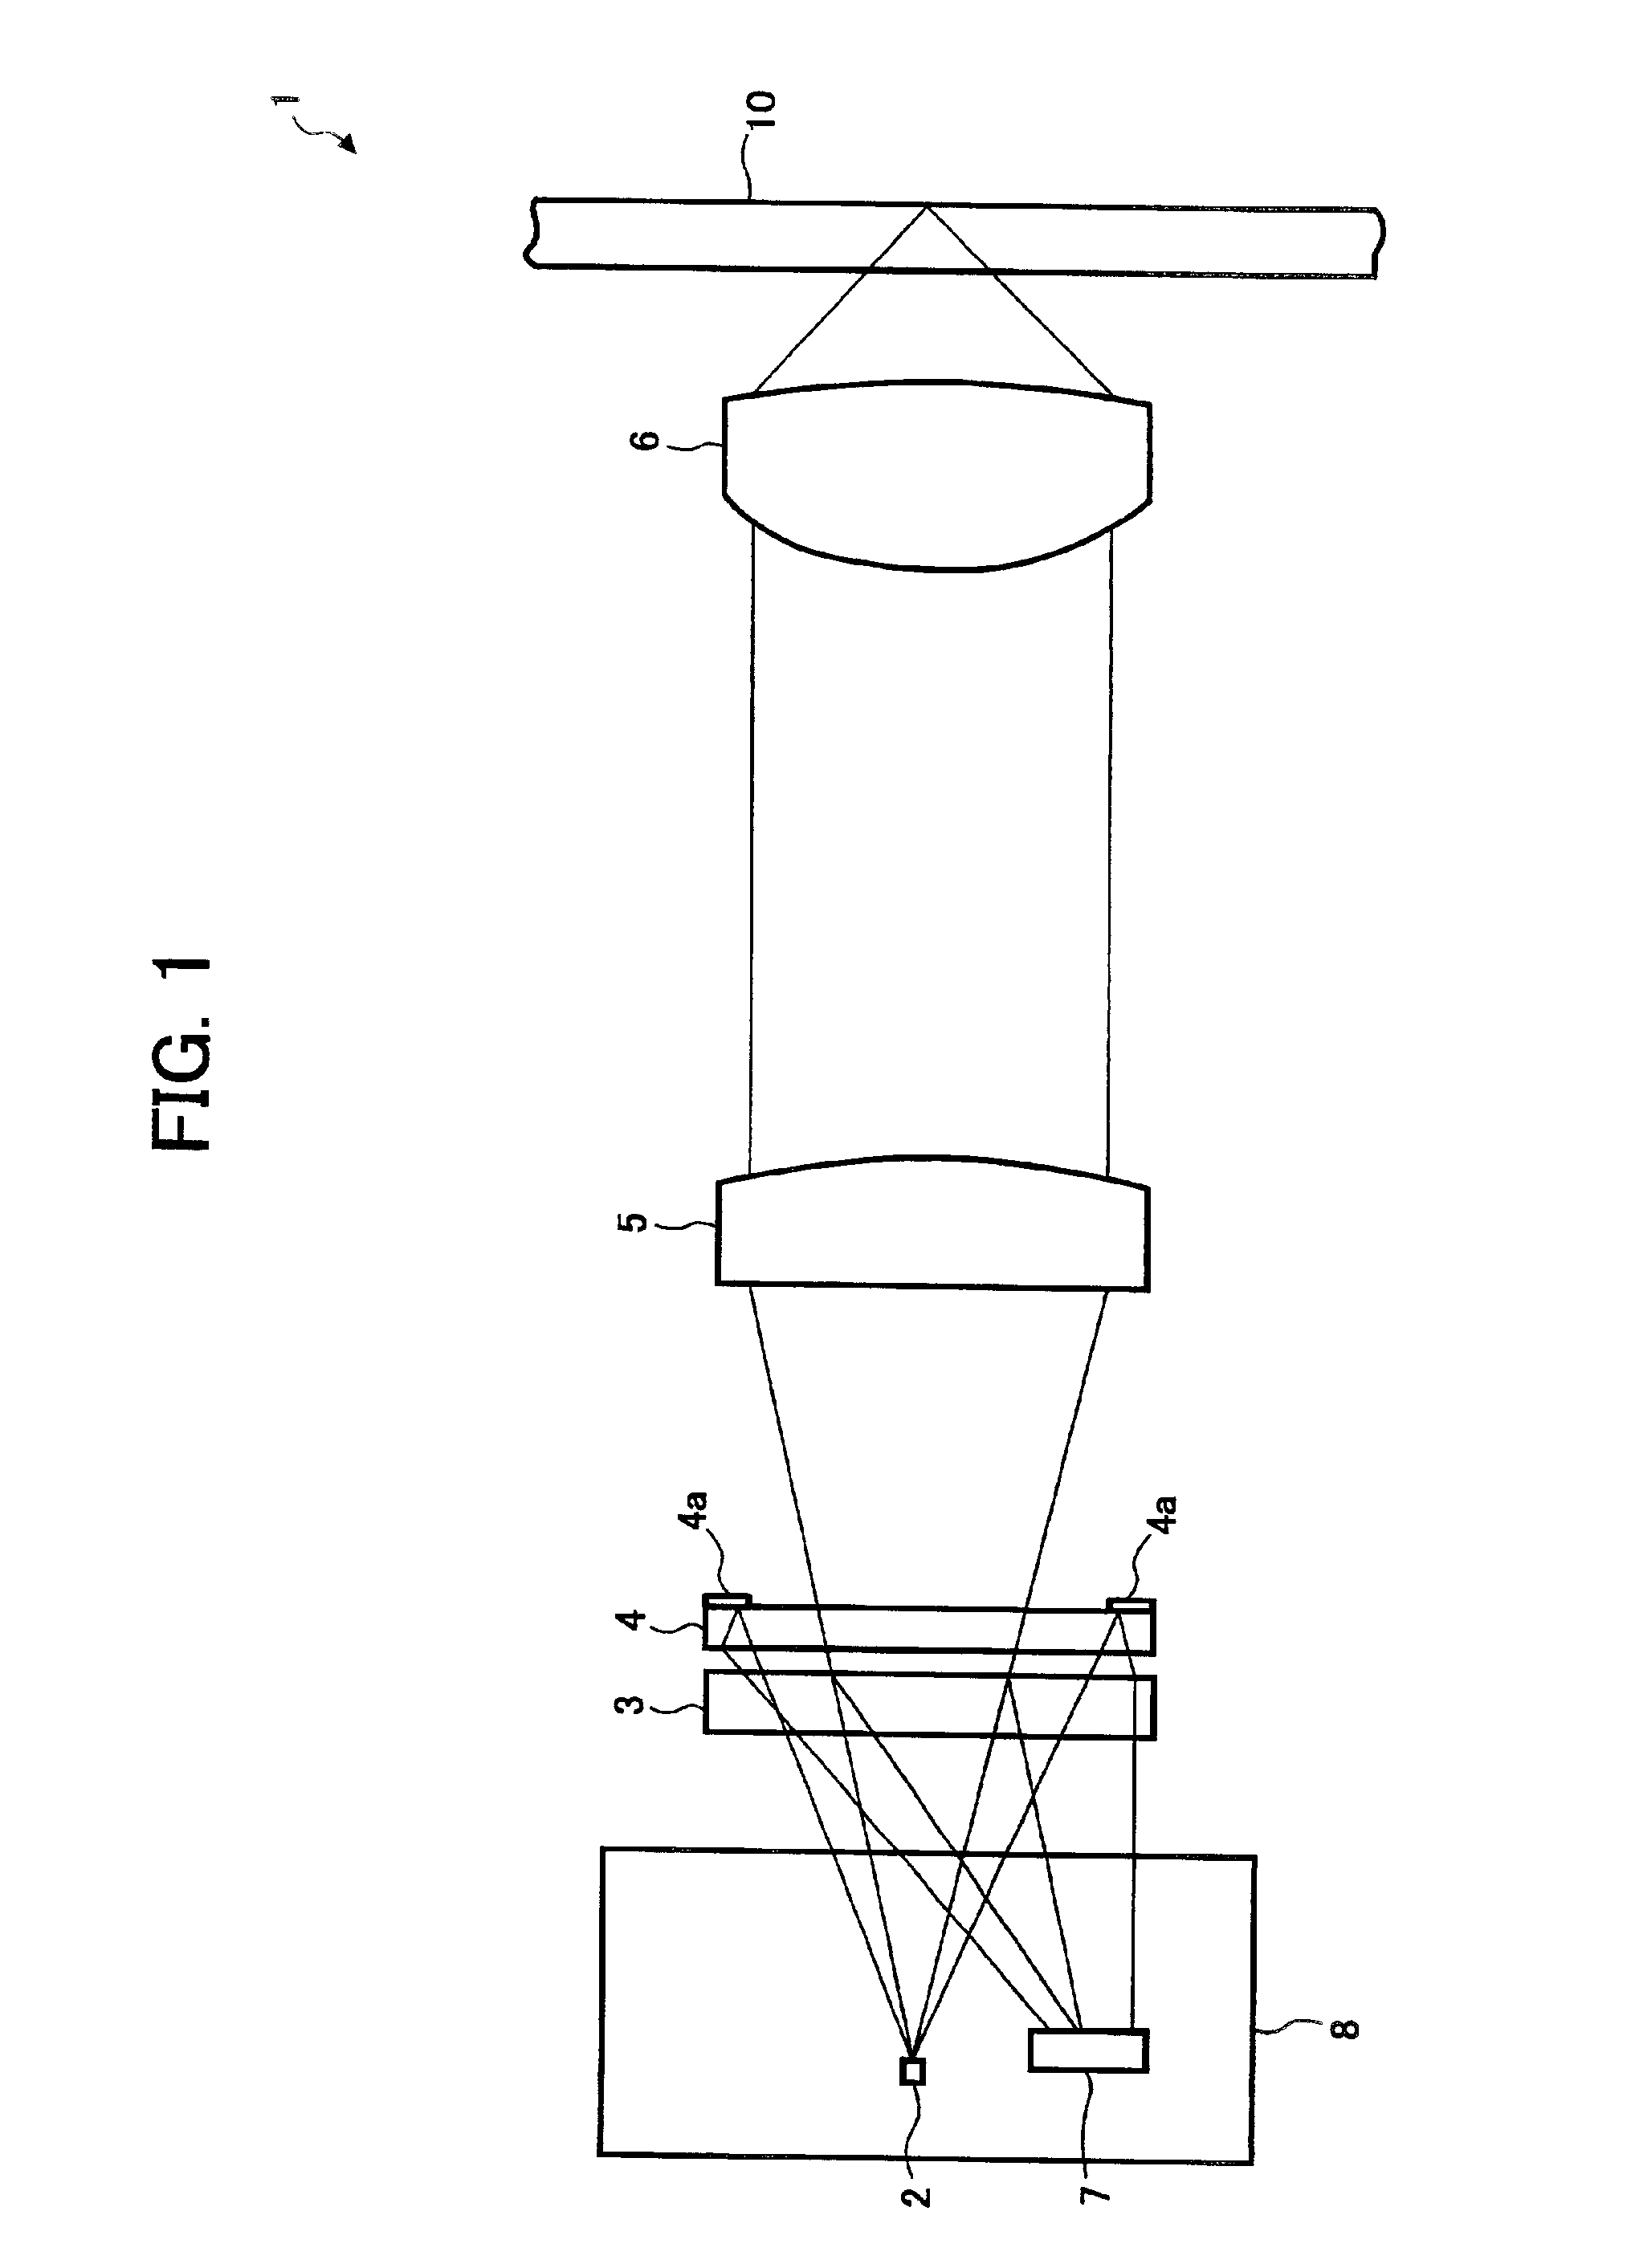 Optical apparatus for recording/reproducing and reading/reproducing data on an optical recording medium, and method for using same